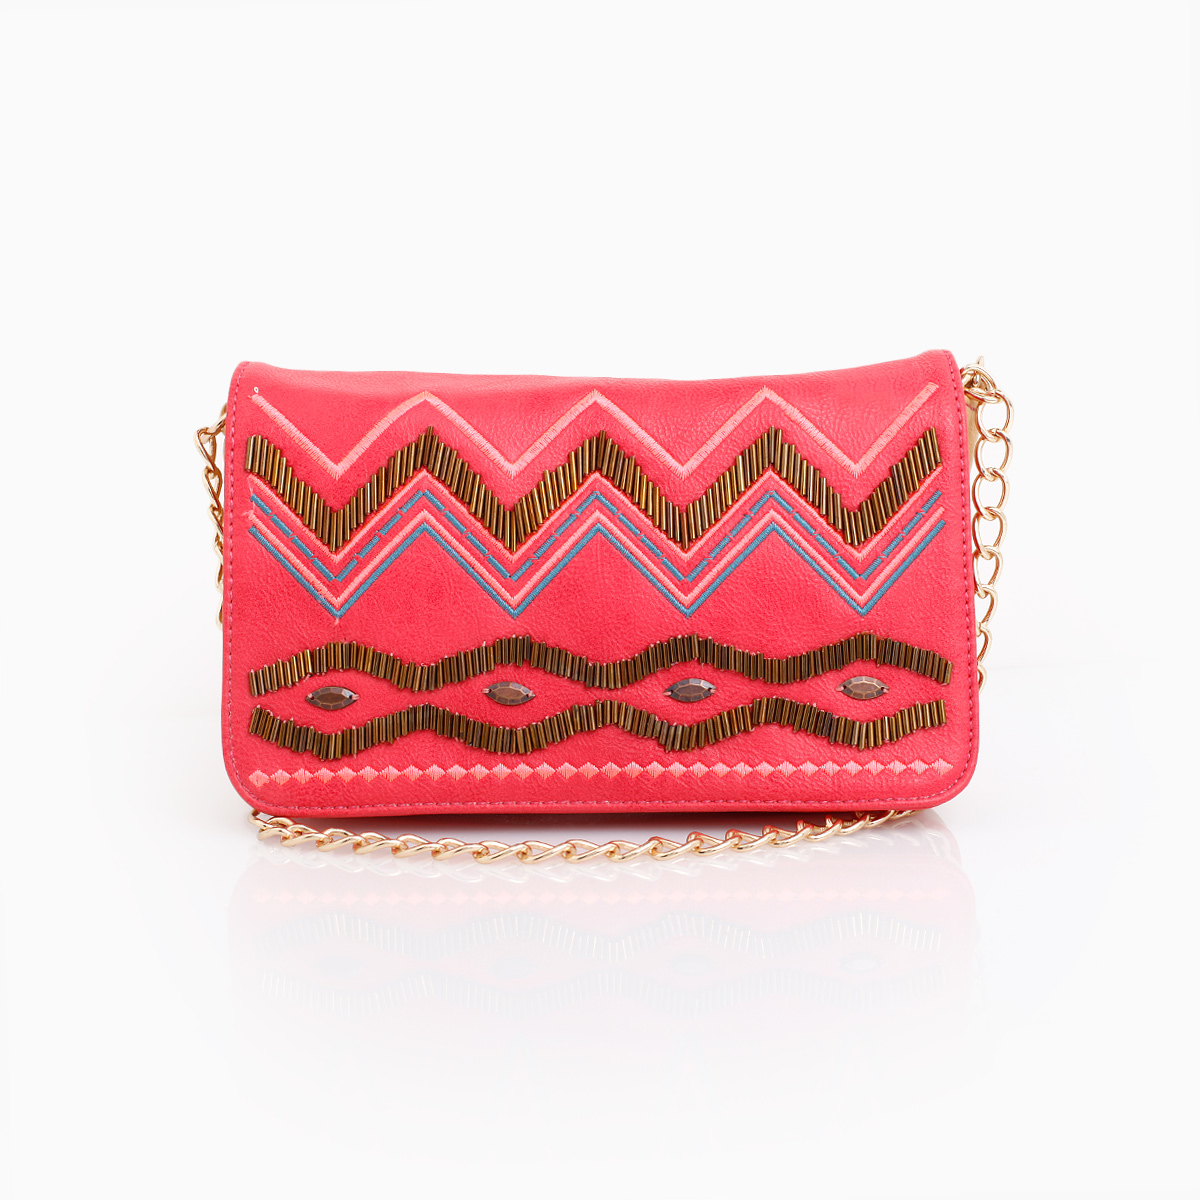 Native Embroidered Mini Bag in Pink | DAILYLOOK